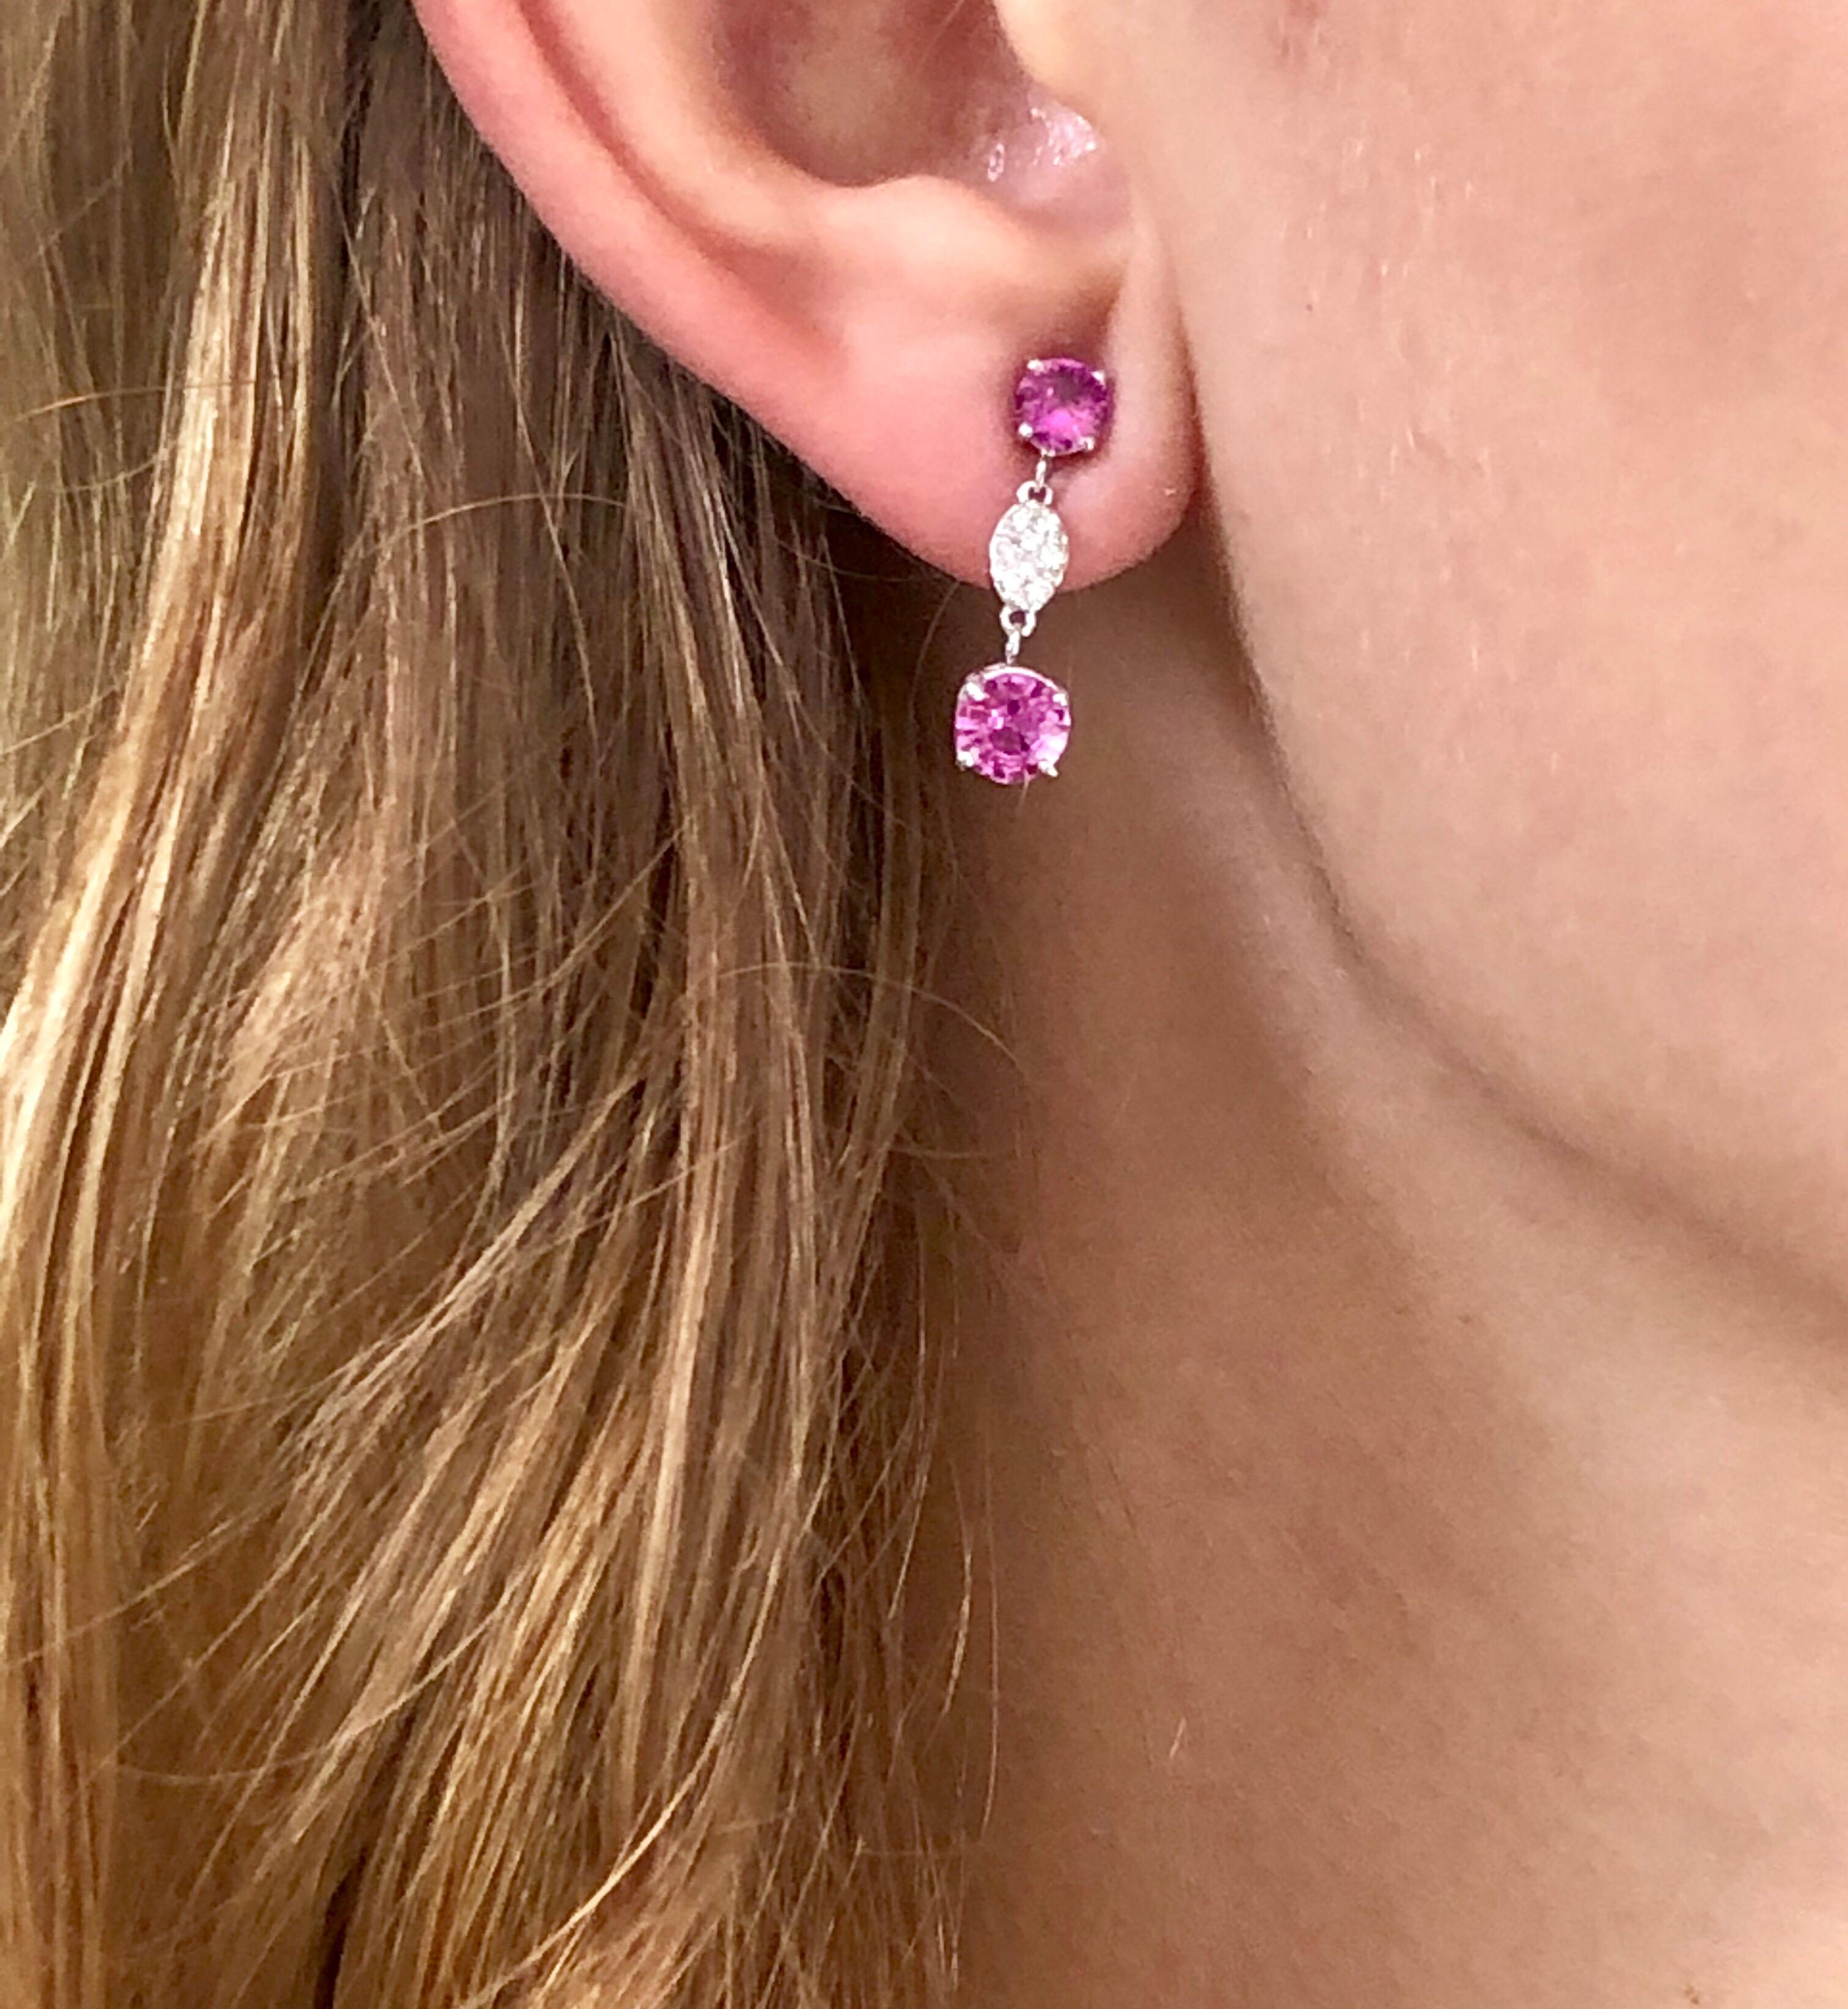 Fourteen karat white gold diamond and pink sapphire earrings one inch long
Four pink Sapphire Weighing 2.10 carats 
Four pink sapphires matching with intense vivid pink color and flawless 
Diamonds weighing 0.22 carat
New Earrings
The 14 karat gold